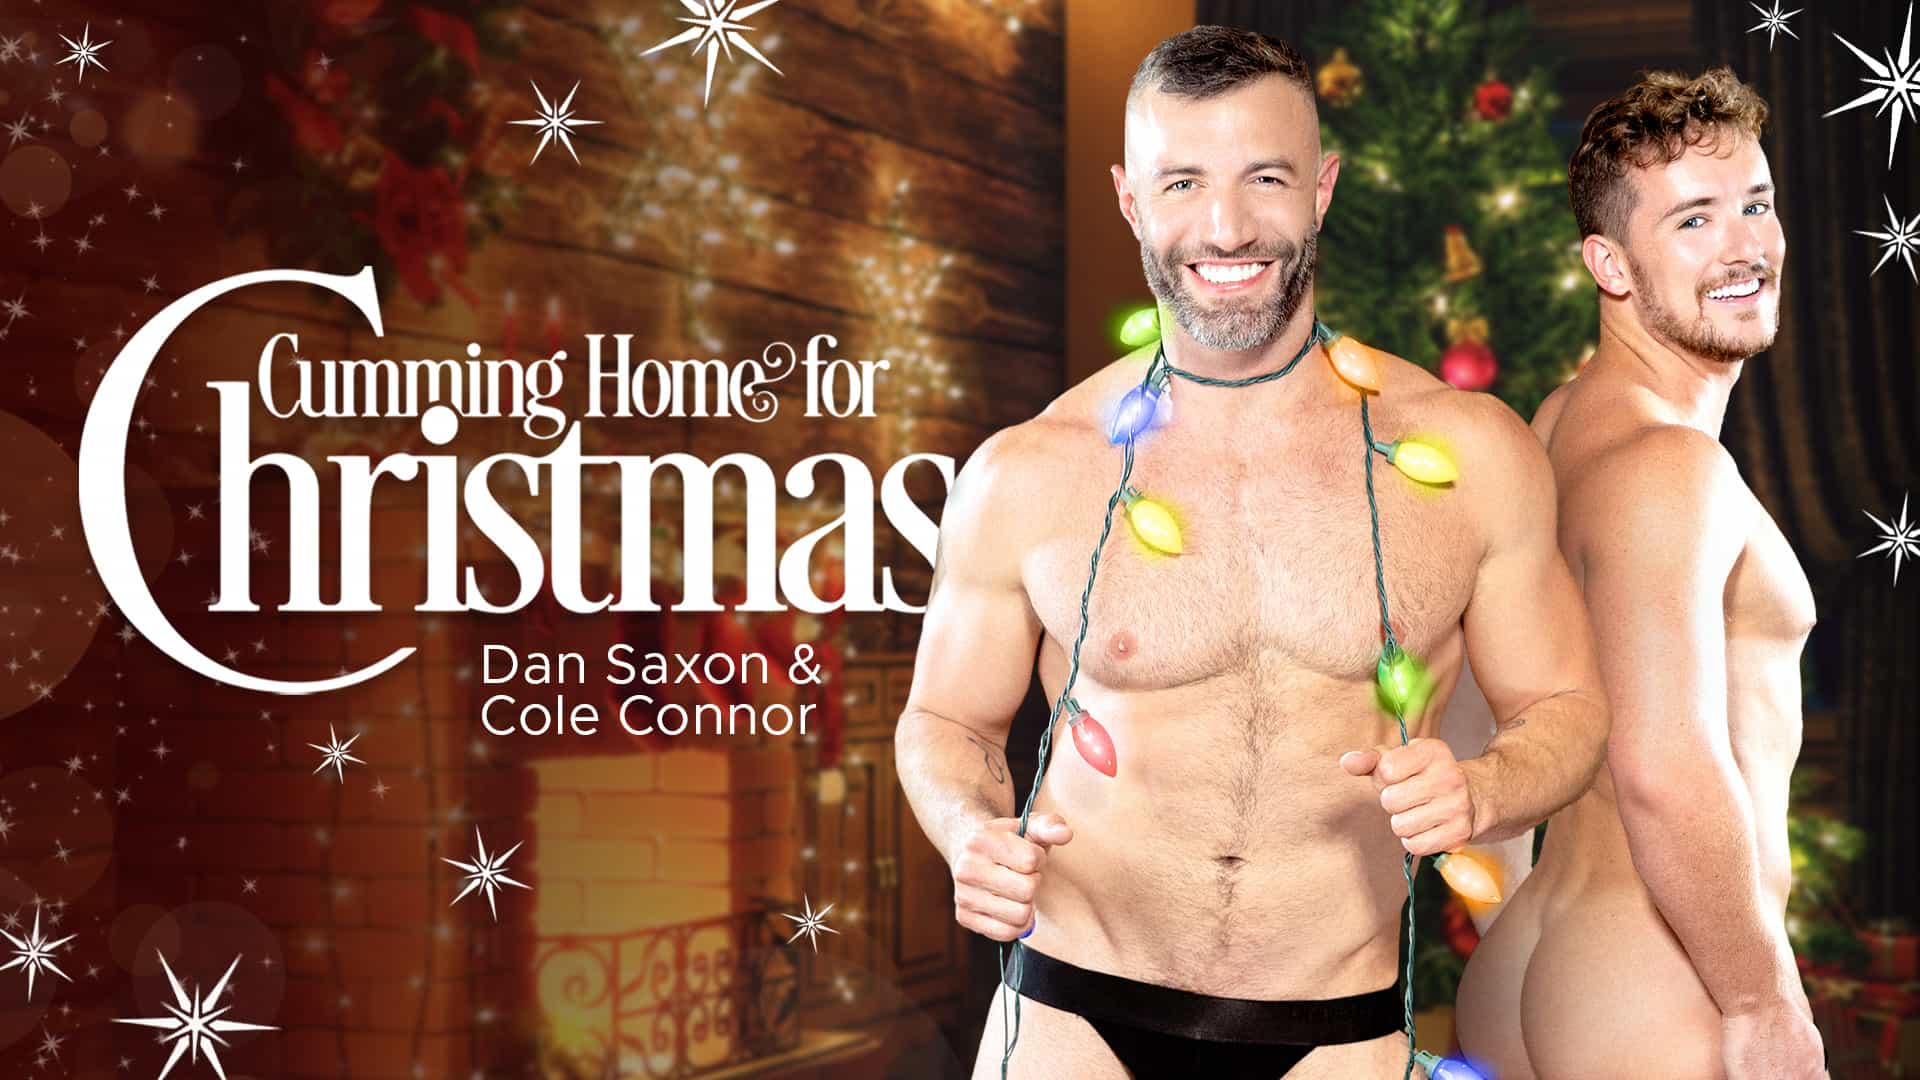 Cumming Home for Christmas, Scene 2 – Dan Saxon and Cole Connor